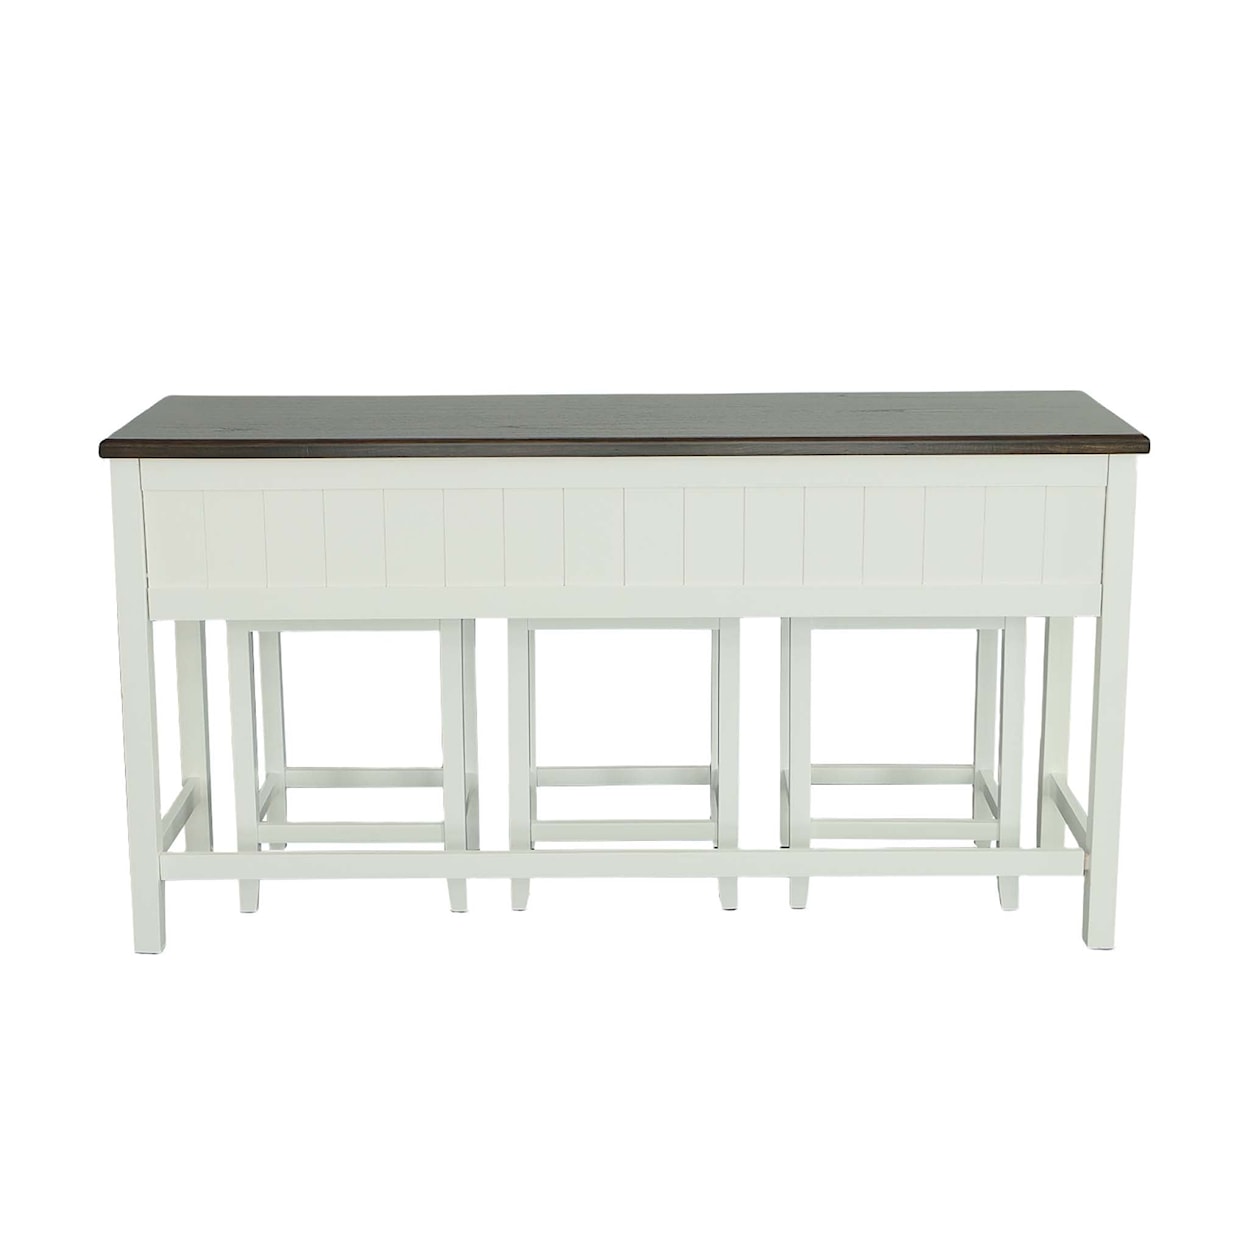 Progressive Furniture Study Hall Counter Table with Seats